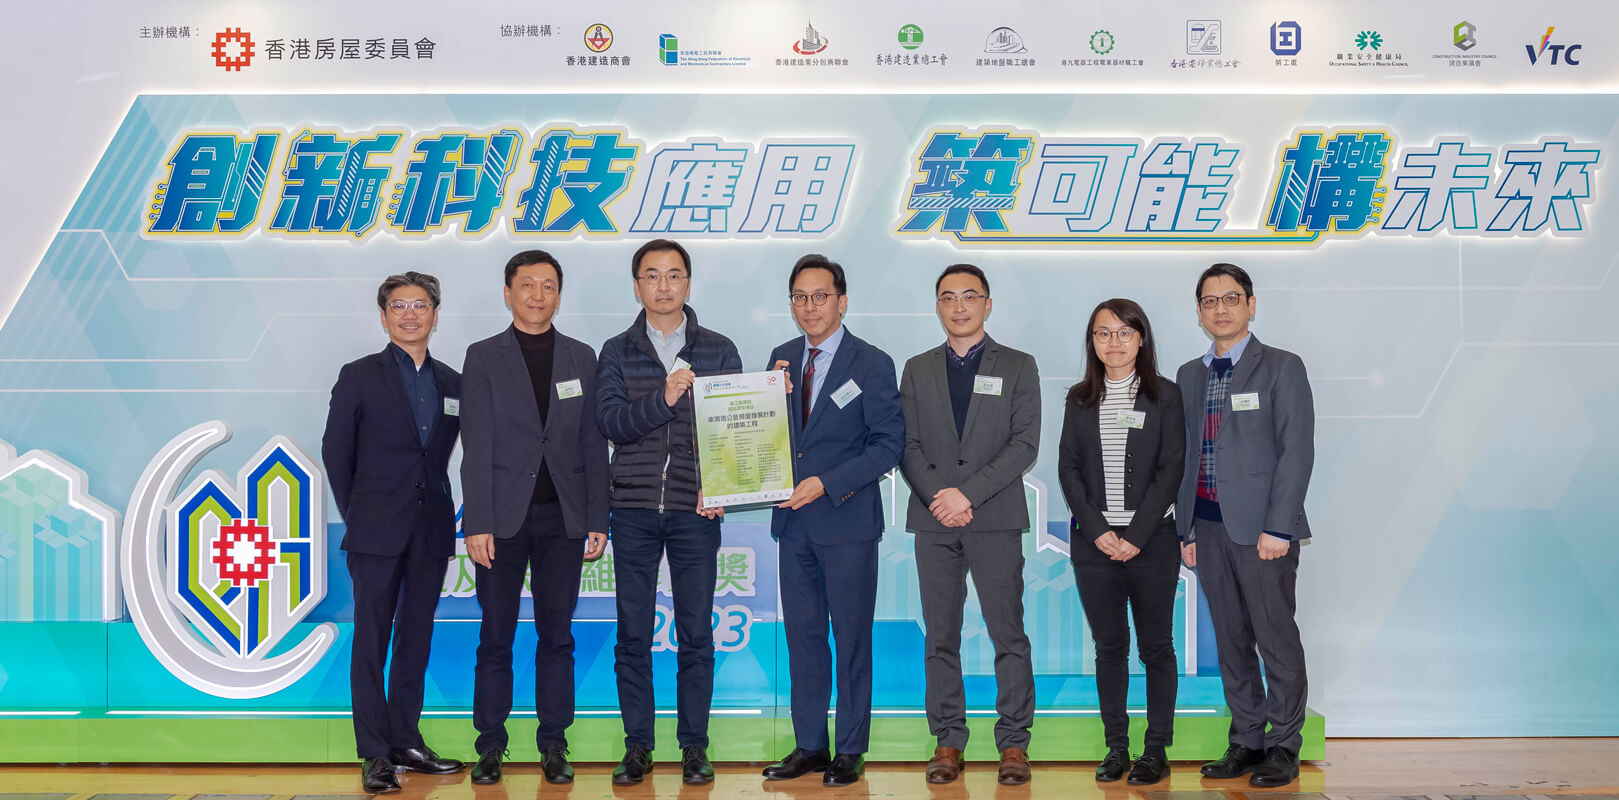 "New Works Projects - Outstanding Building Project" — pictured with the Acting Deputy Director of Housing (Development and Construction), Mr Daniel Leung (centre) are Project Team representatives of the Award winning project — Construction of Public Housing Development at Chai Wan Road, Chai Wan.